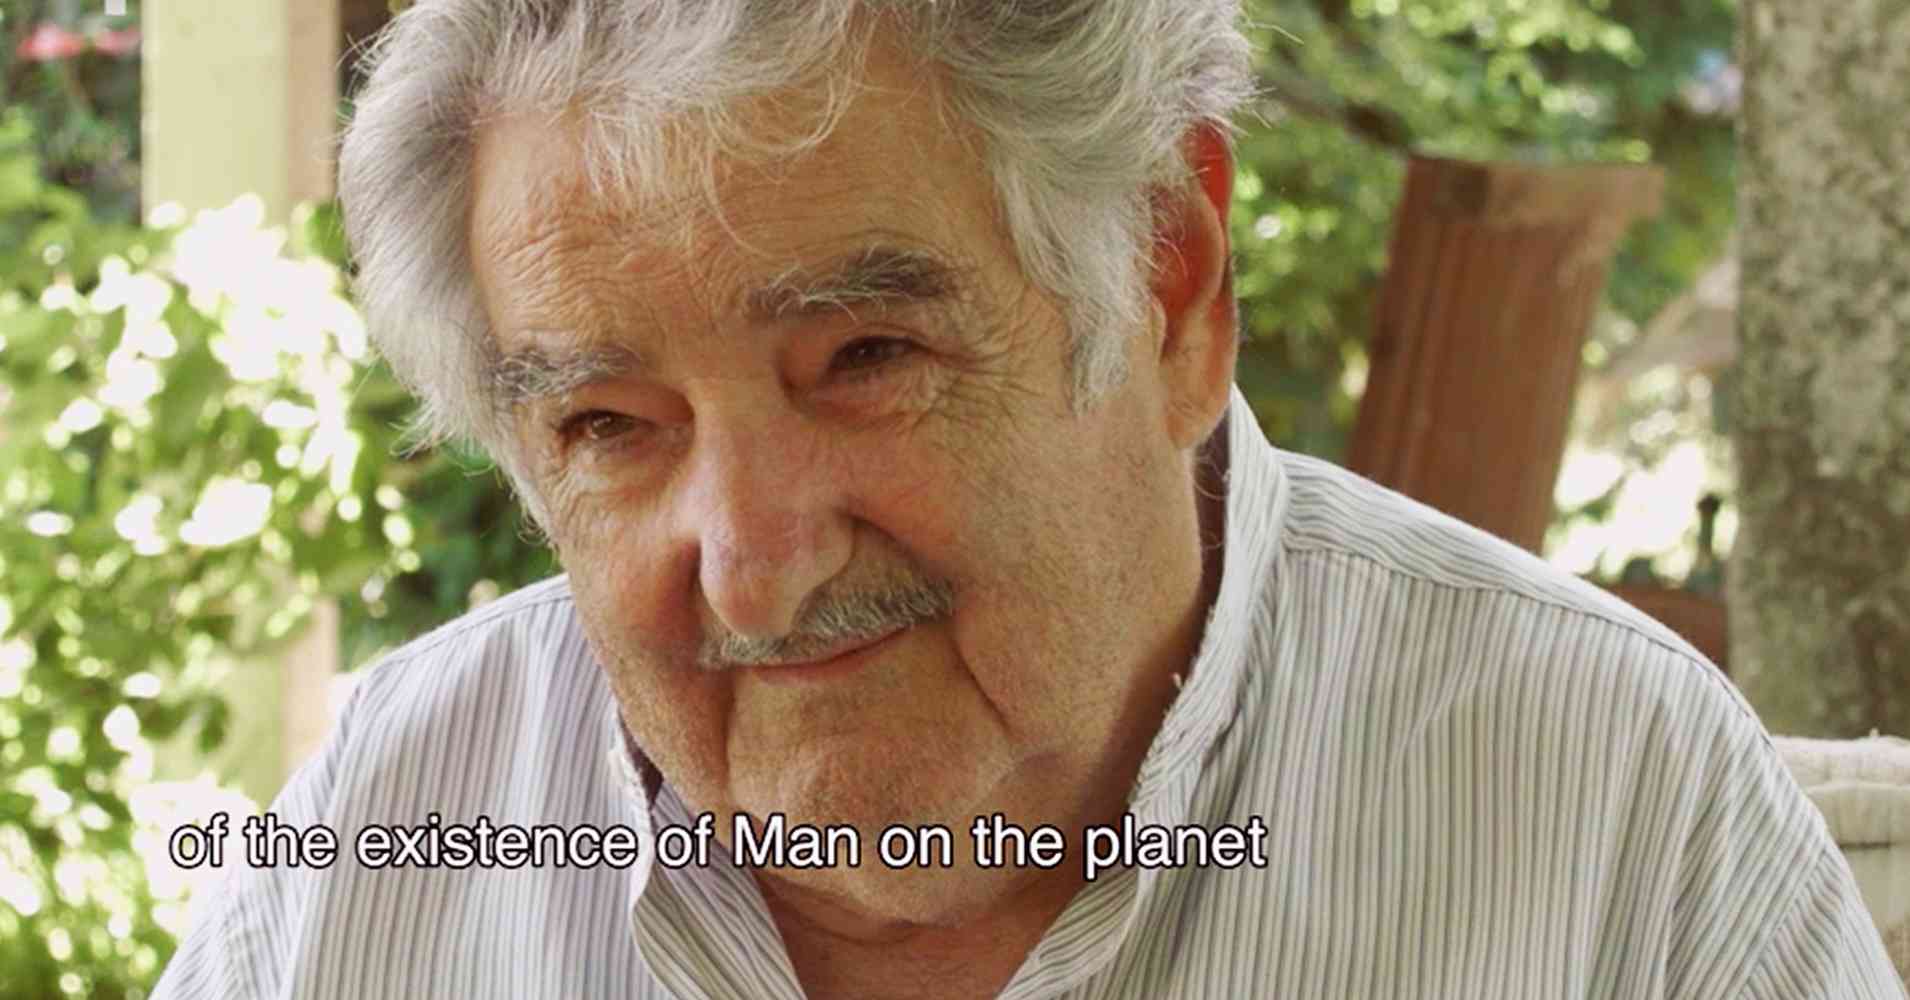 'Politics, Economics and Environment'. Documentary. Section from 3 hour interview with Pepe Mujica, President of Uruguay - A unique interview with one of the most enigmatic and profound political figures of the 21 century.